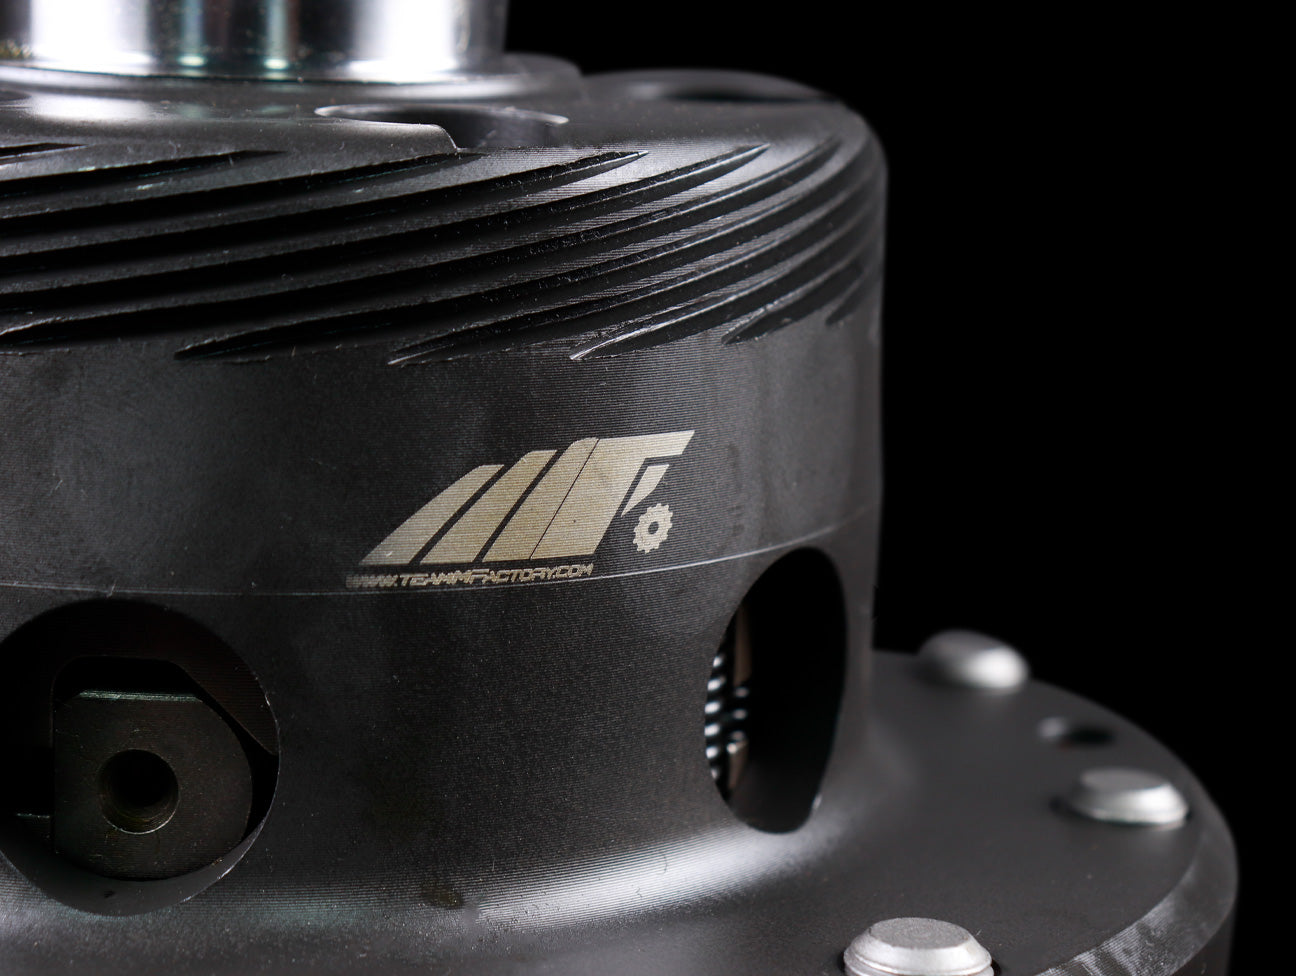 MFactory 1.0 Way Metal Plate Limited Slip Differential - K-Series